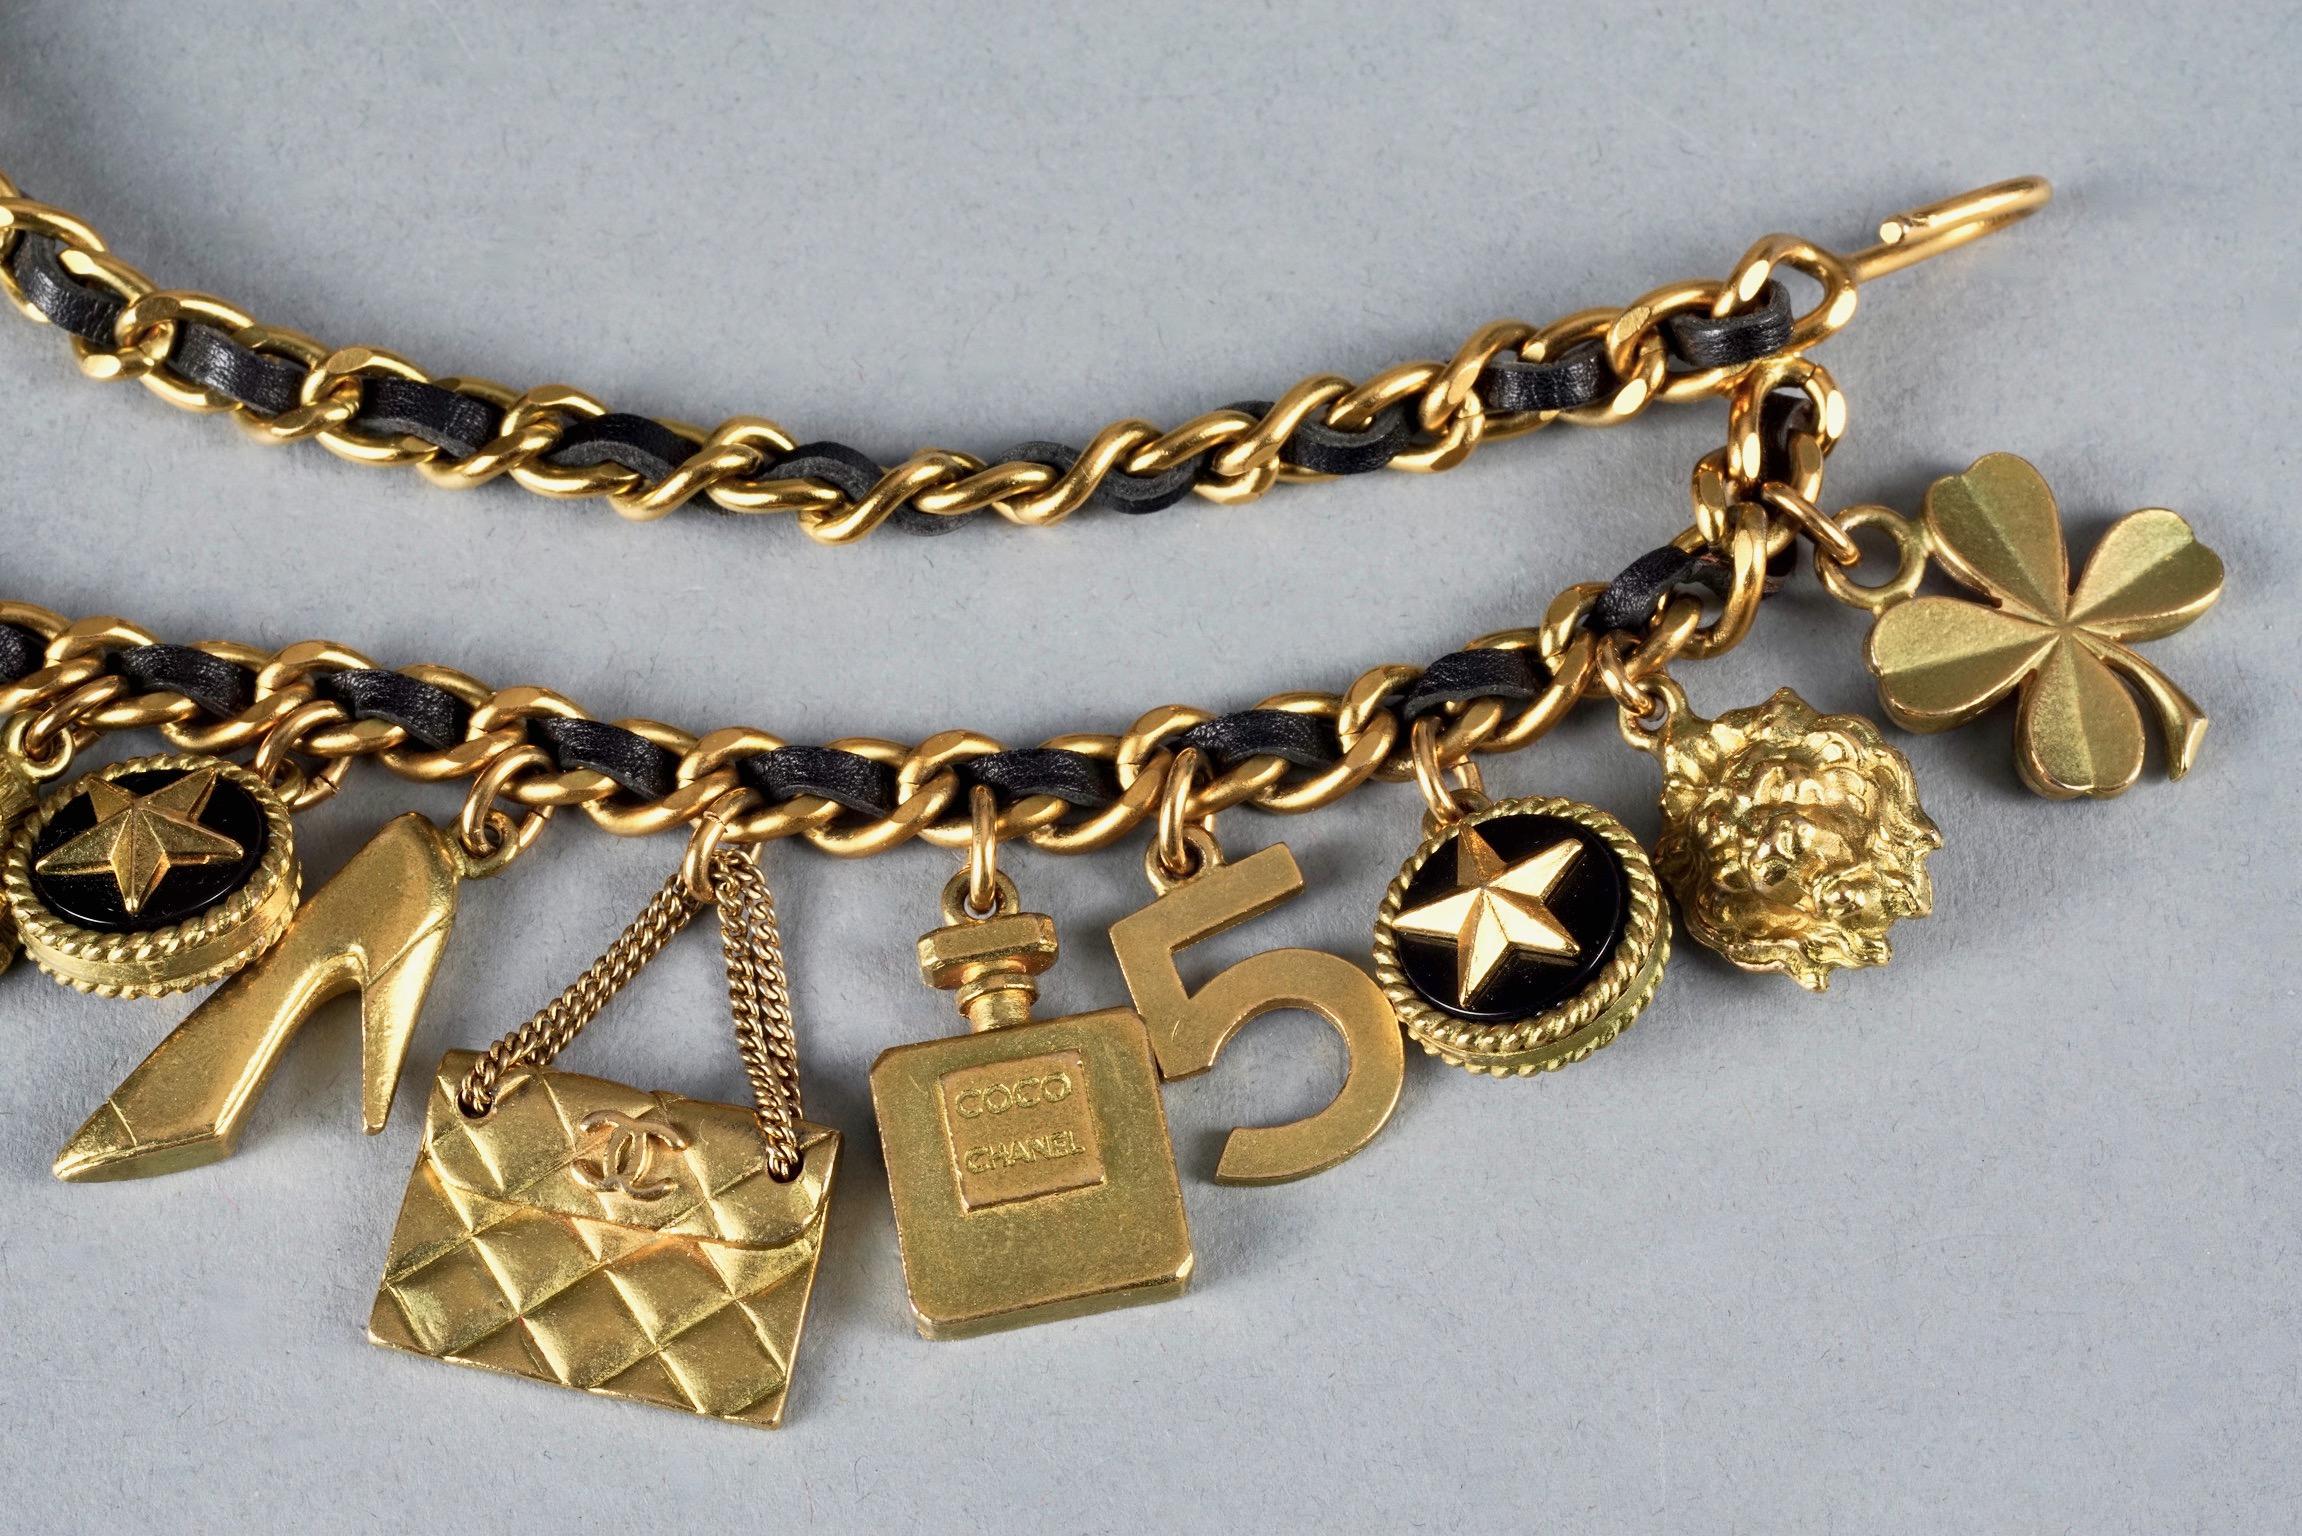 Vintage 1994 CHANEL Lucky Charm Leather Chain Necklace Belt For Sale 6